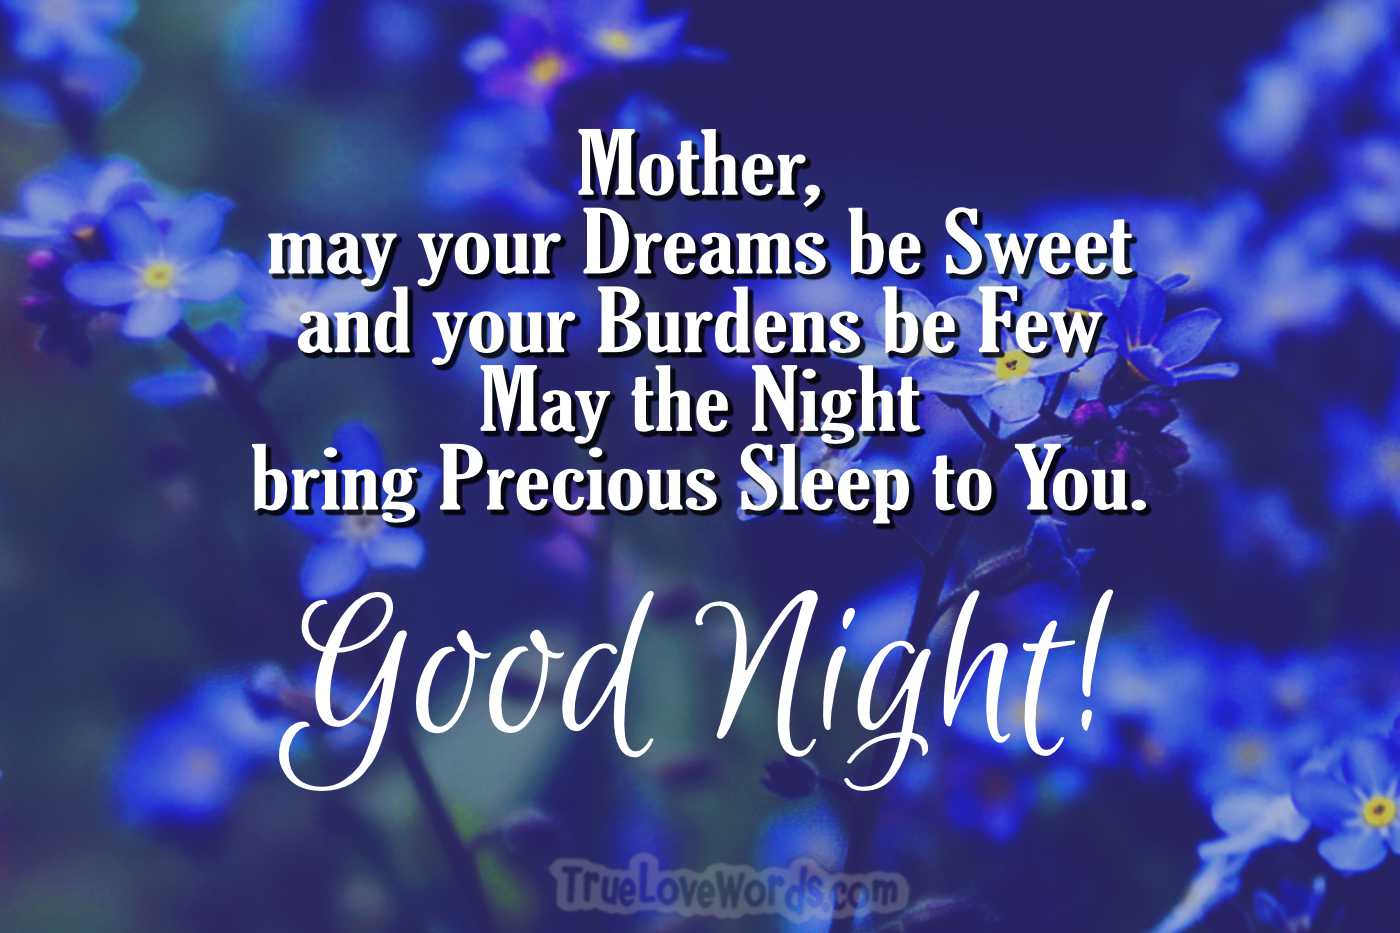 55 Good Night Messages for Mom » True Love Words